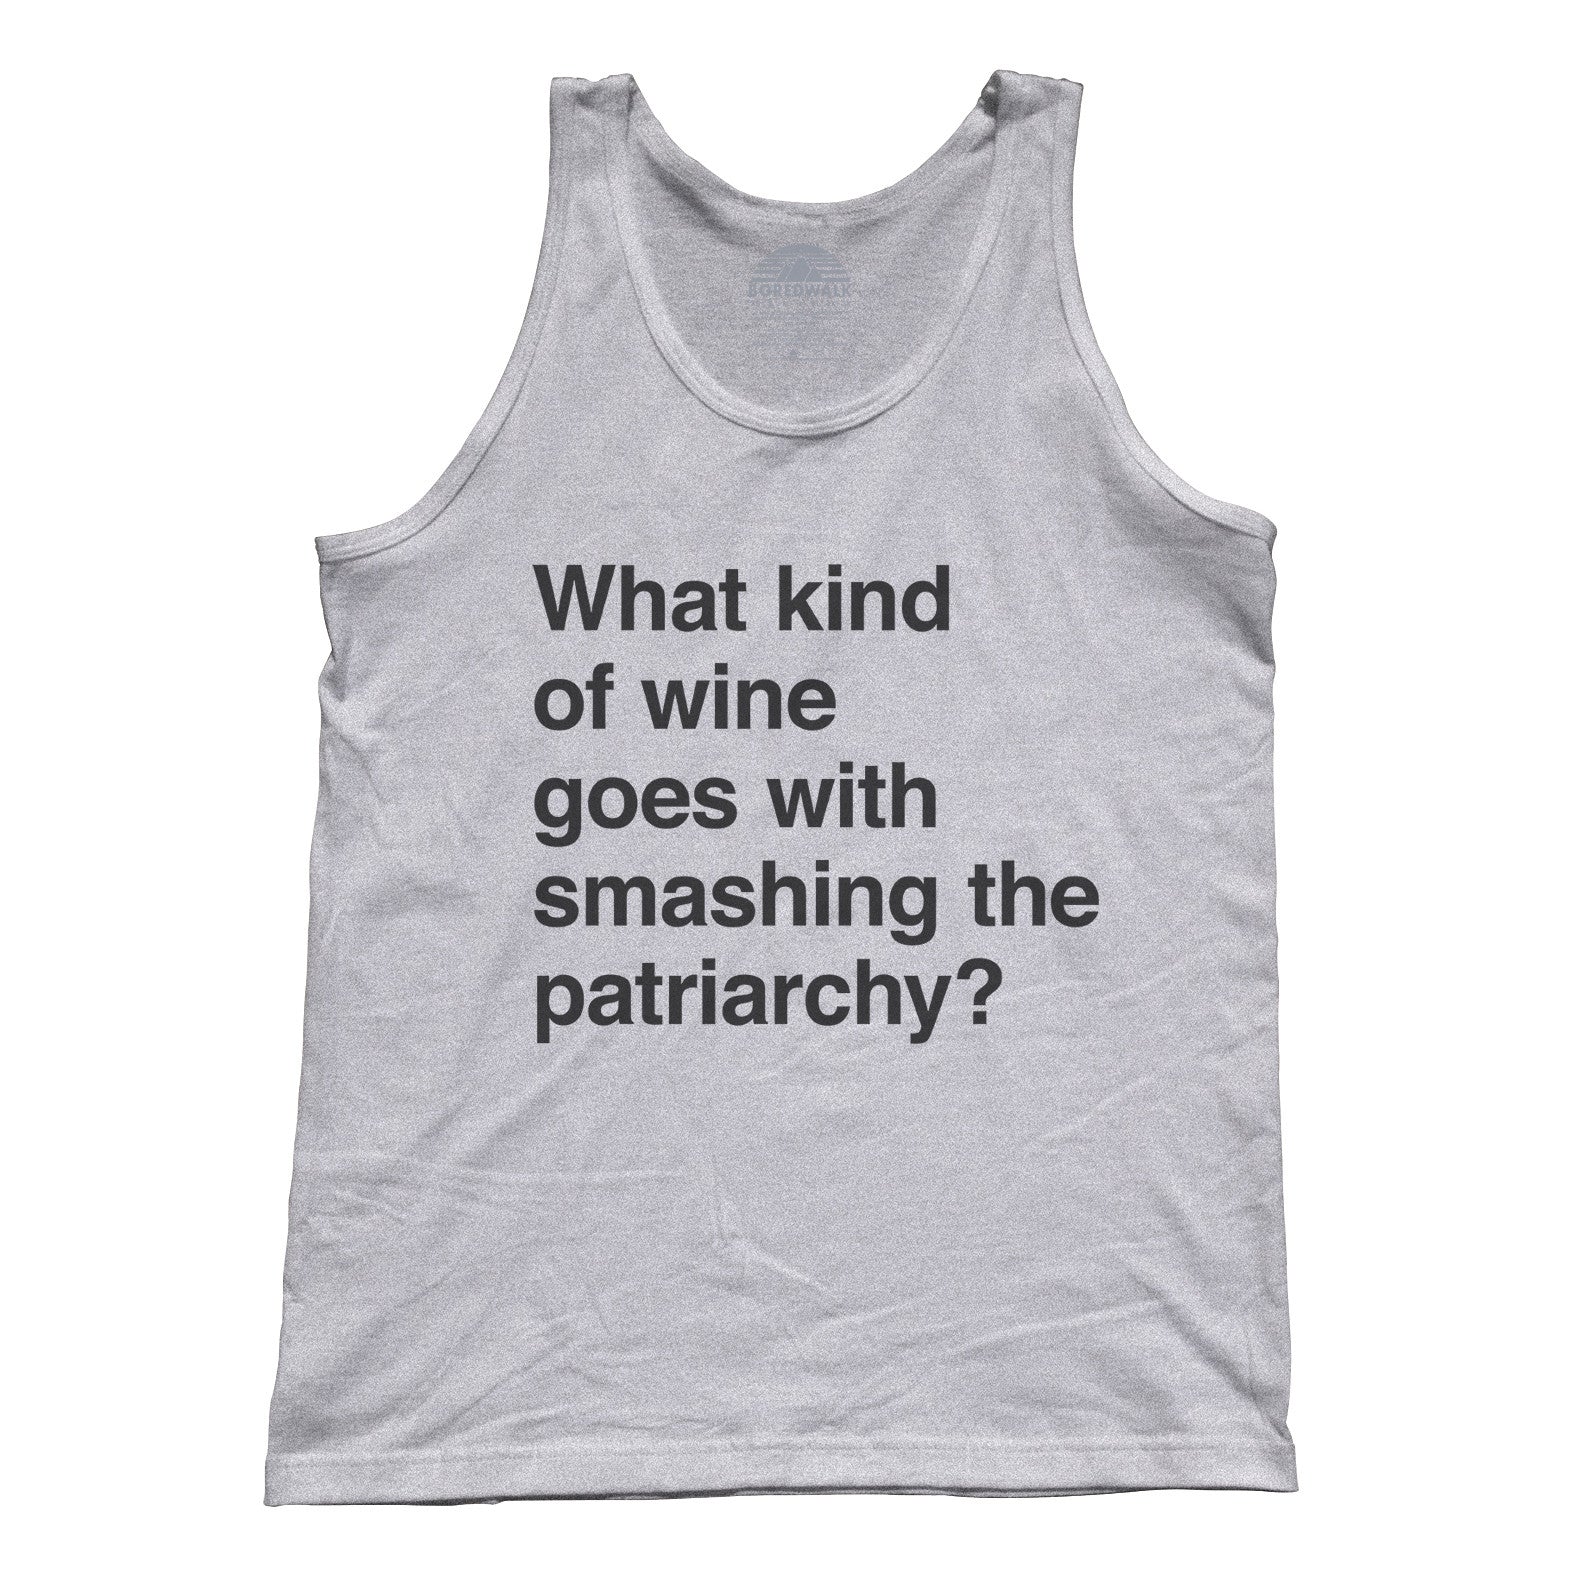 Unisex What Kind of Wine Goes with Smashing the Patriarchy? Tank Top Funny Feminist Shirt